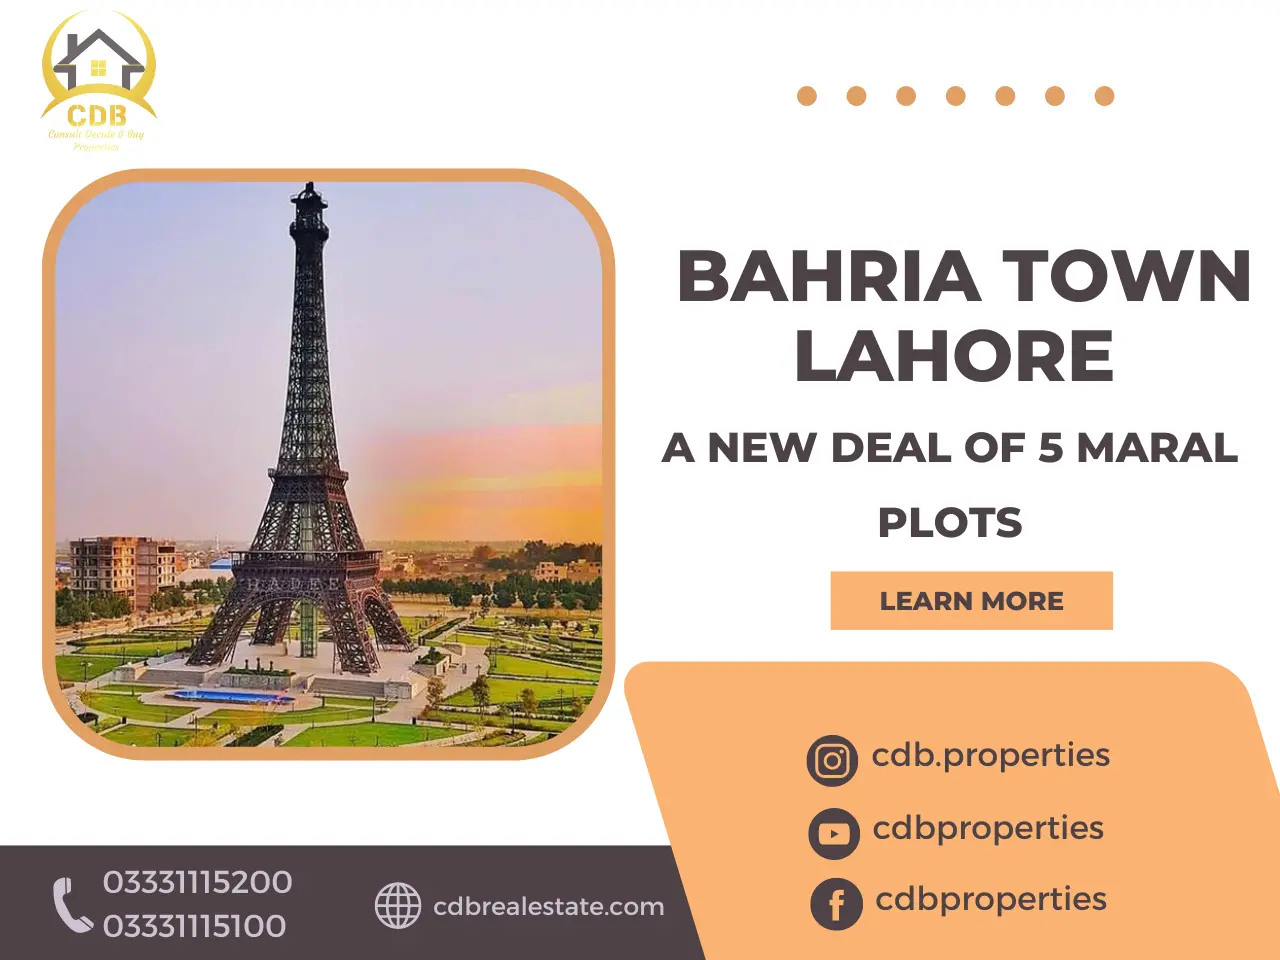 New Deal of 5 Maral Plots in Bahria Town Lahore